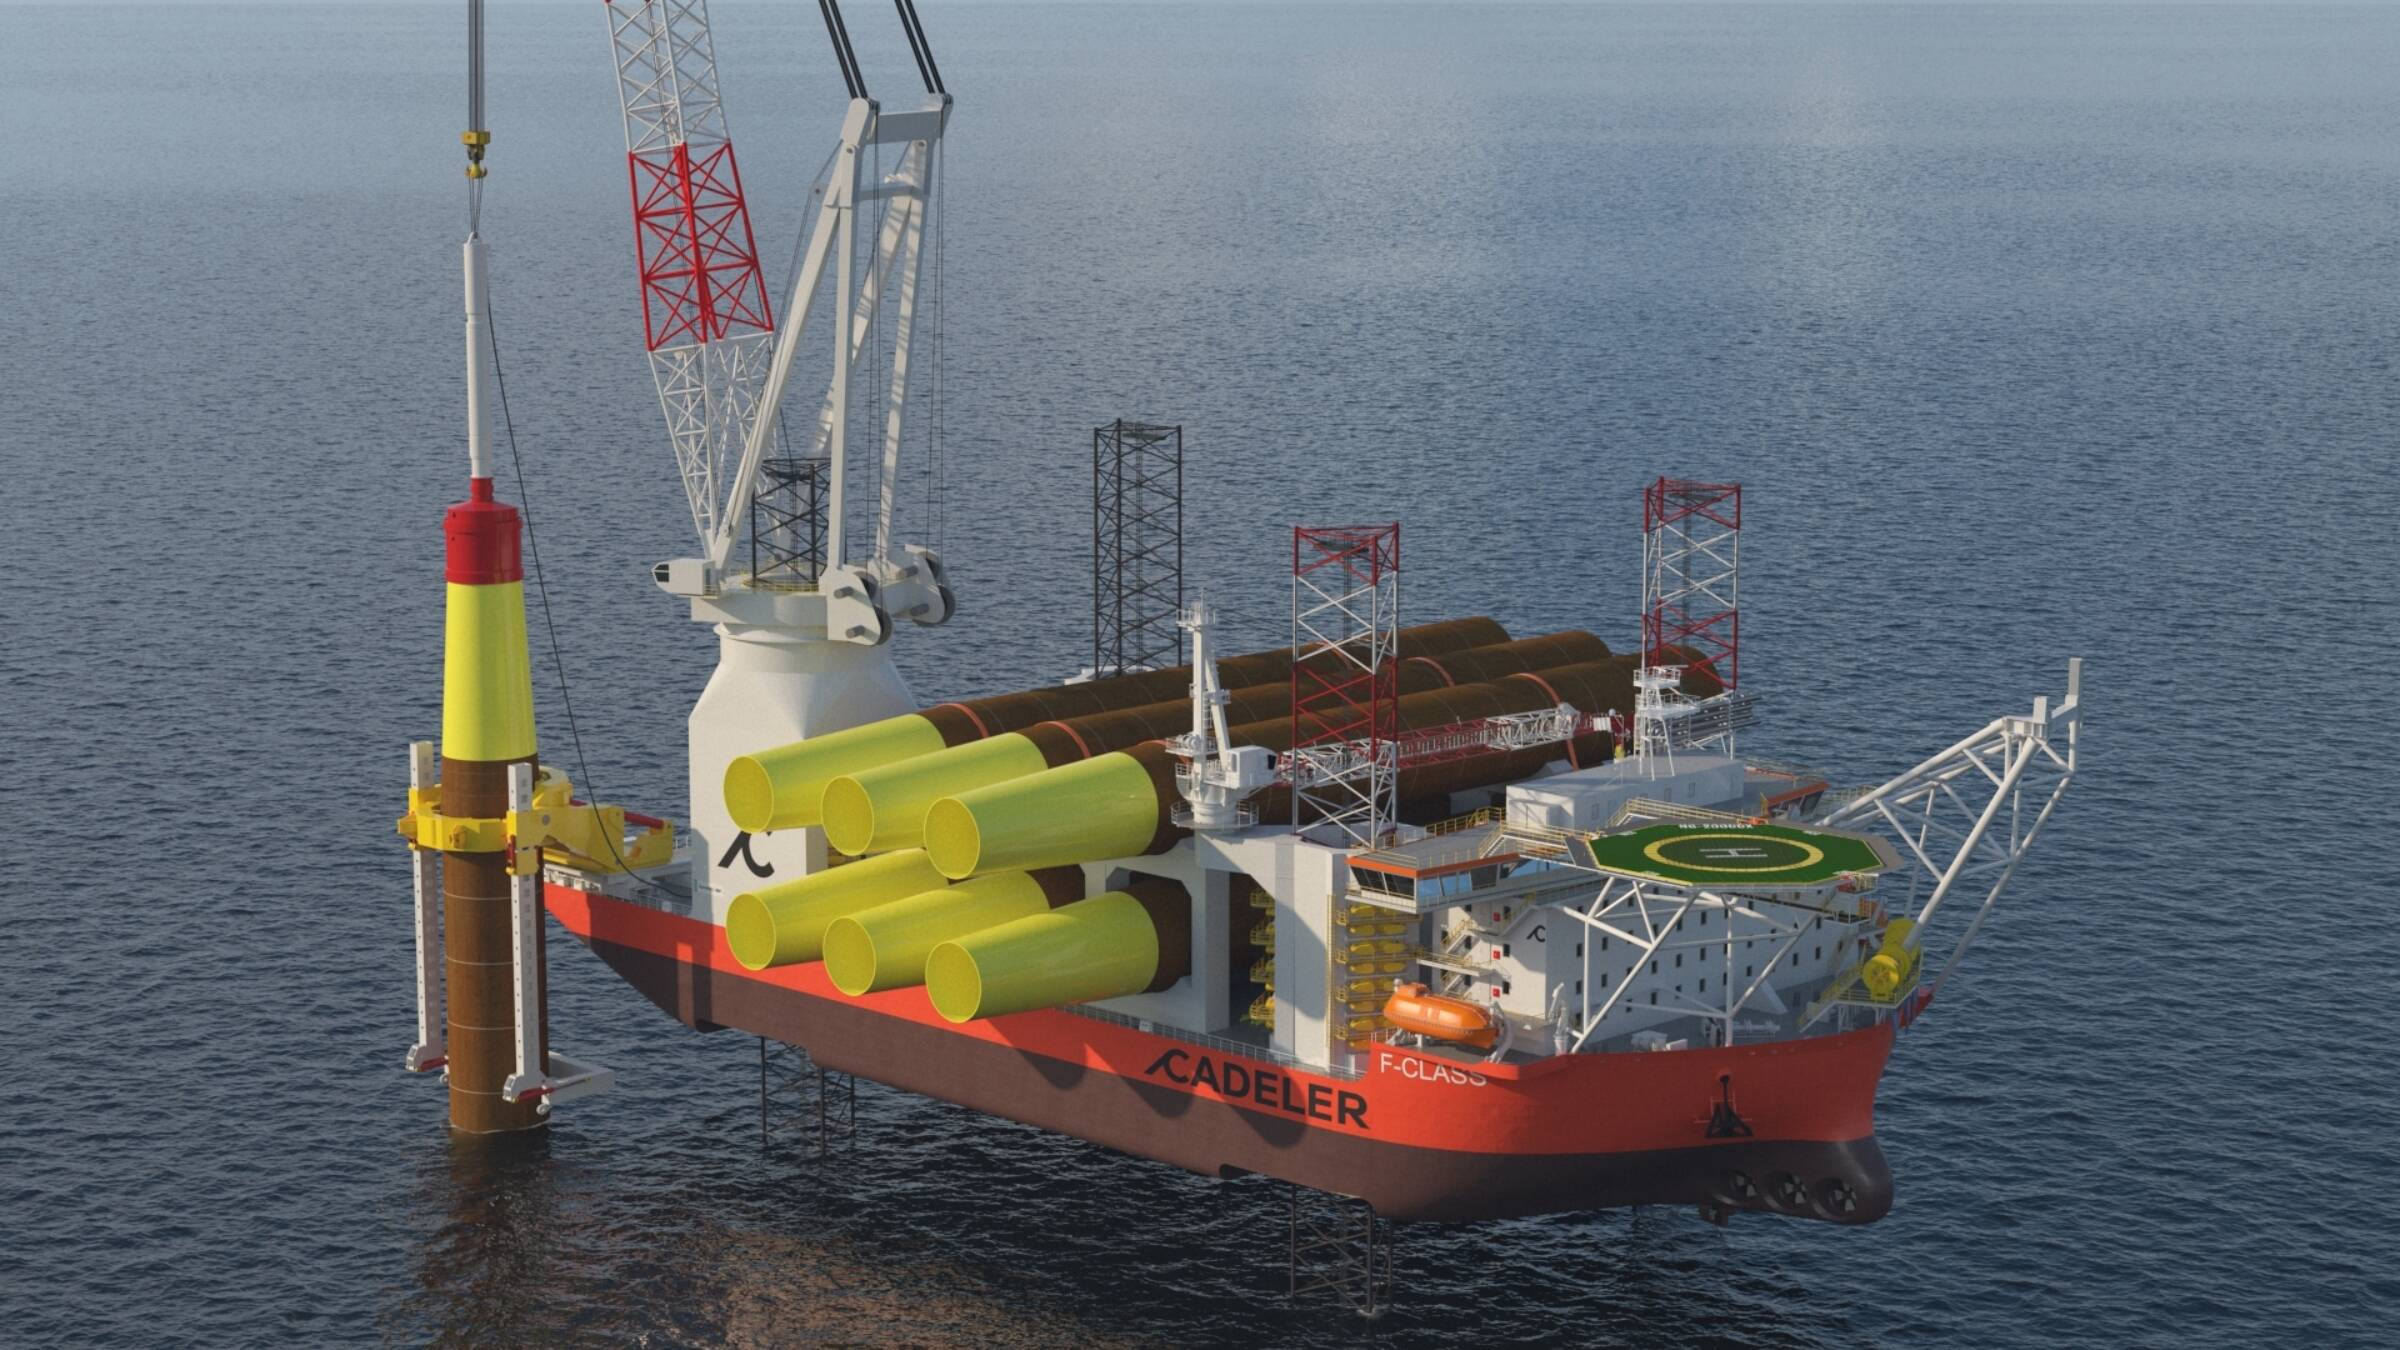 Cadeler Signs Significant Installation Vessel Reservation Agreement with an Undisclosed Client, Securing Capacity for Future Projects Worth Up to €700Mln